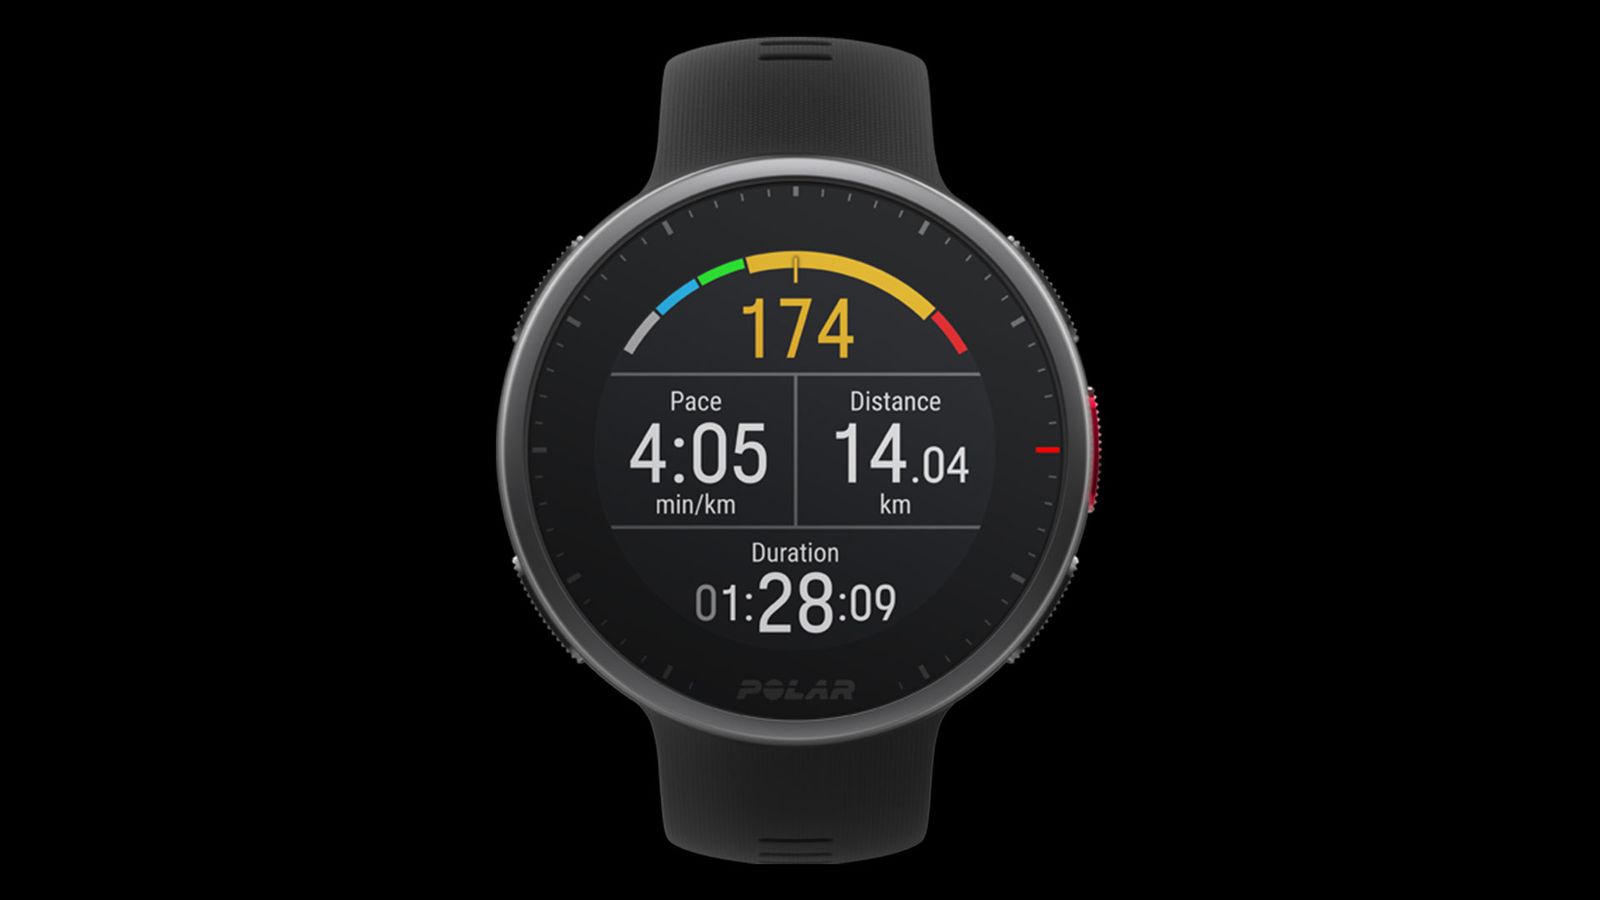 Polar Vantage V2 product image of a black smartwatch with running metrics on its display.